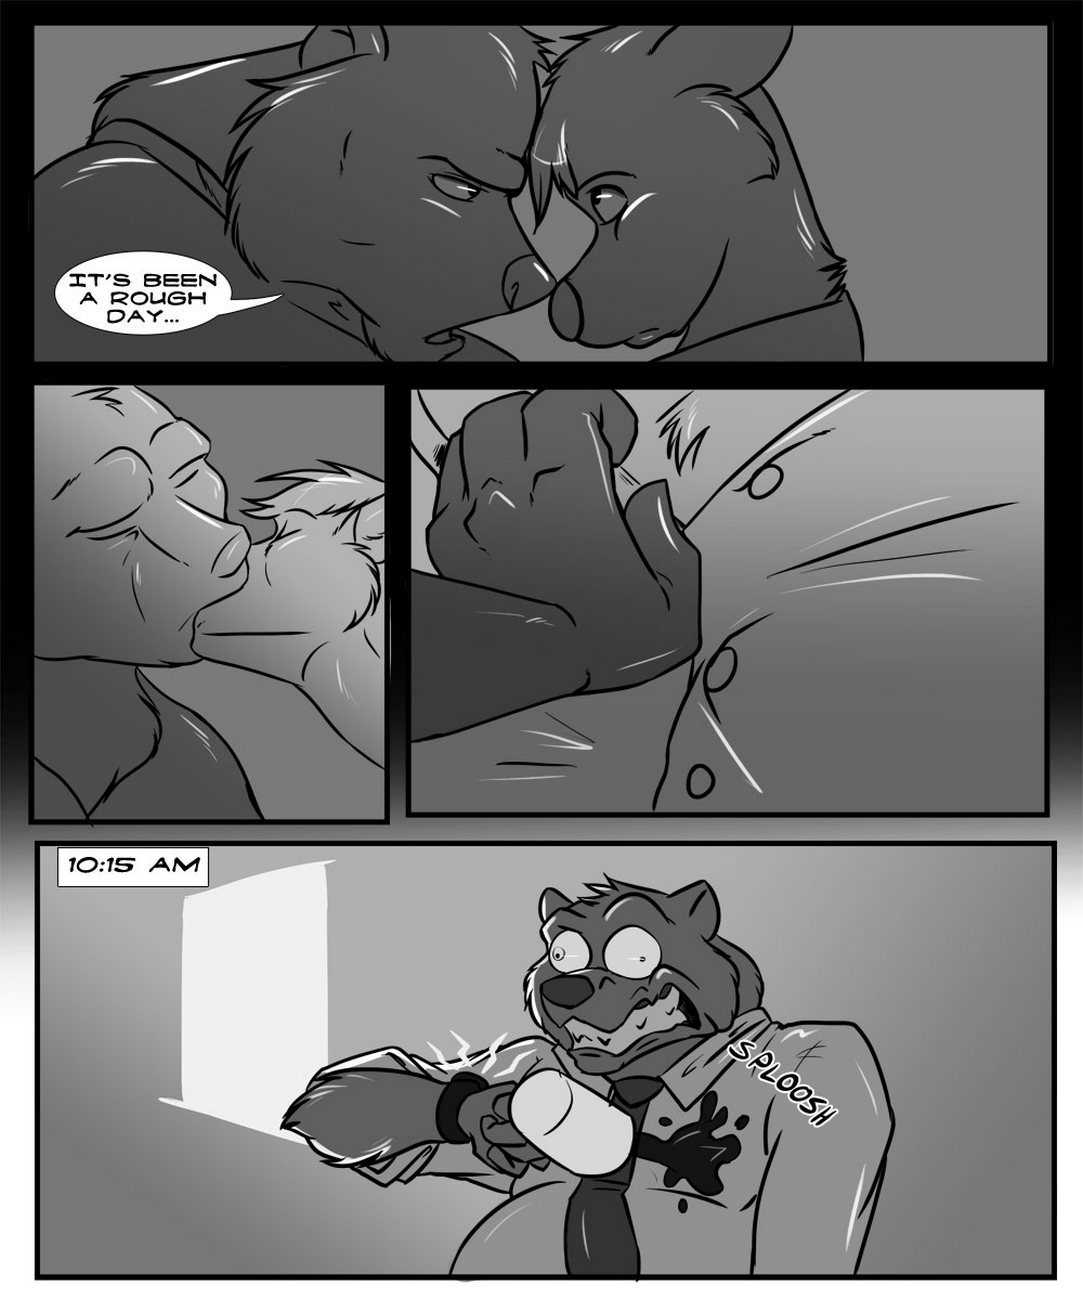 Rough Day page 3